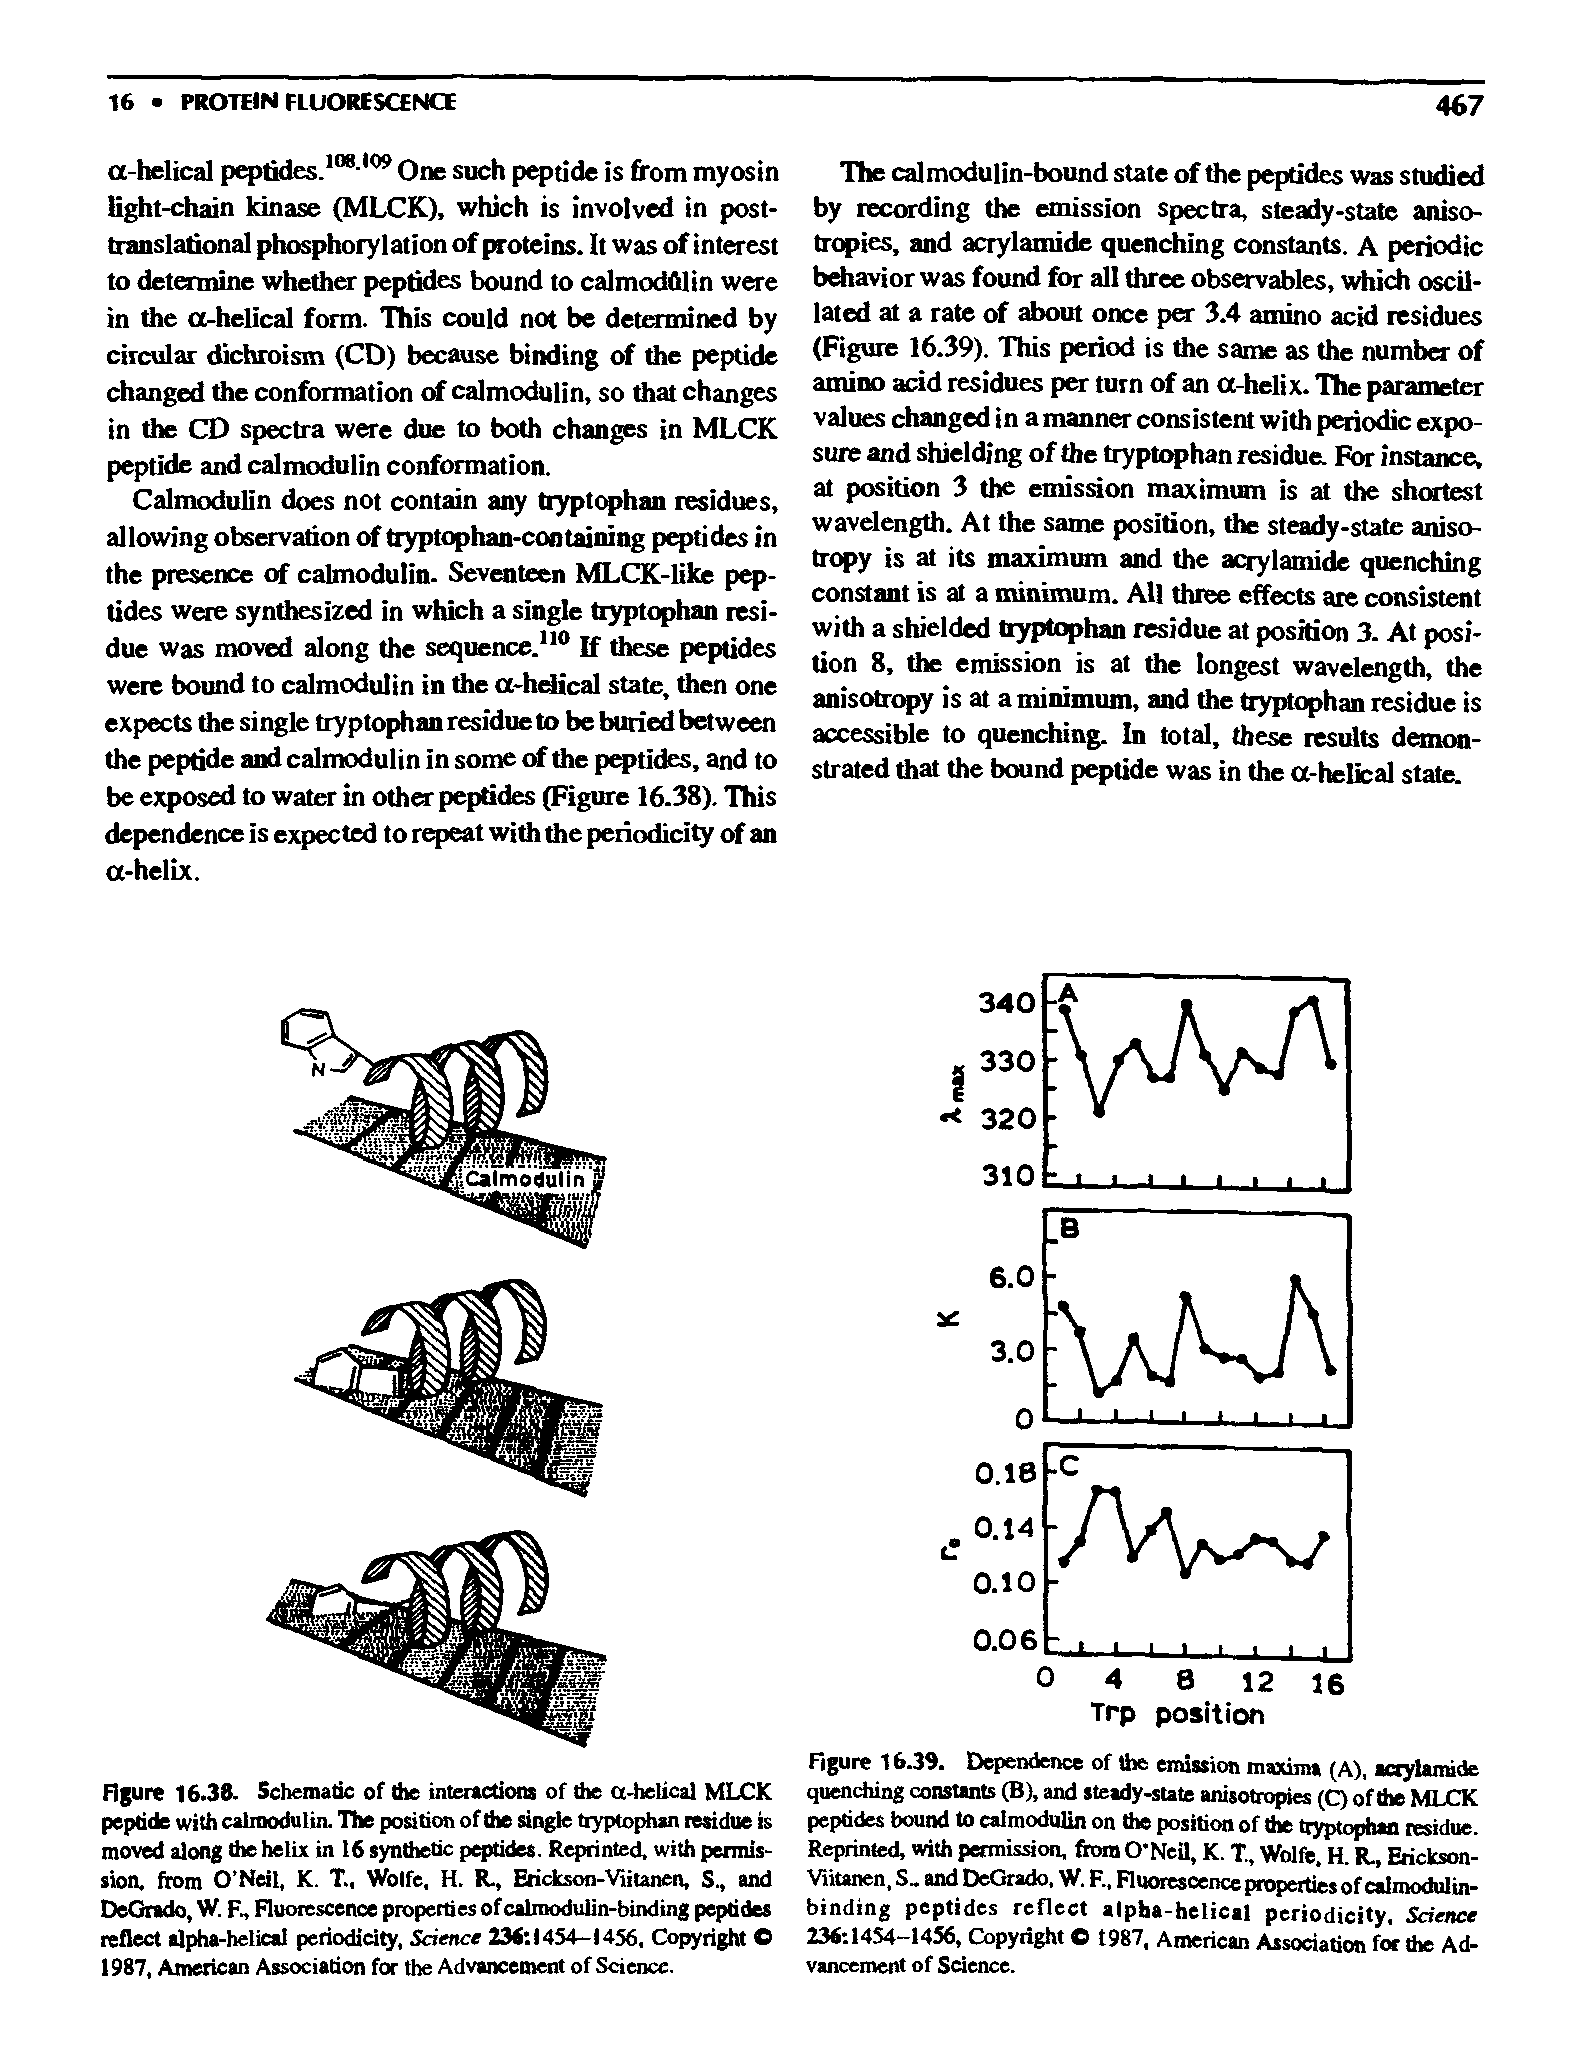 Figure 16.38- Schemade of the inteiactlona of the a-hetical MLCK peptide with calioodutin. The position of the single tryptophan residue is moved along the helix in 16 synthetic peptides. Reprinted, with permission. from O Neil, K. T., Wolfe, H. K, EricksM-Viitanen, S., and OeOrado, W. F. Fluorescence properties of calmodulin-binding peptides reflect alpha-helieal periodicity, Science 236 1454-1456, Copyright O 1987, American Association for the Advancemeat of Science.